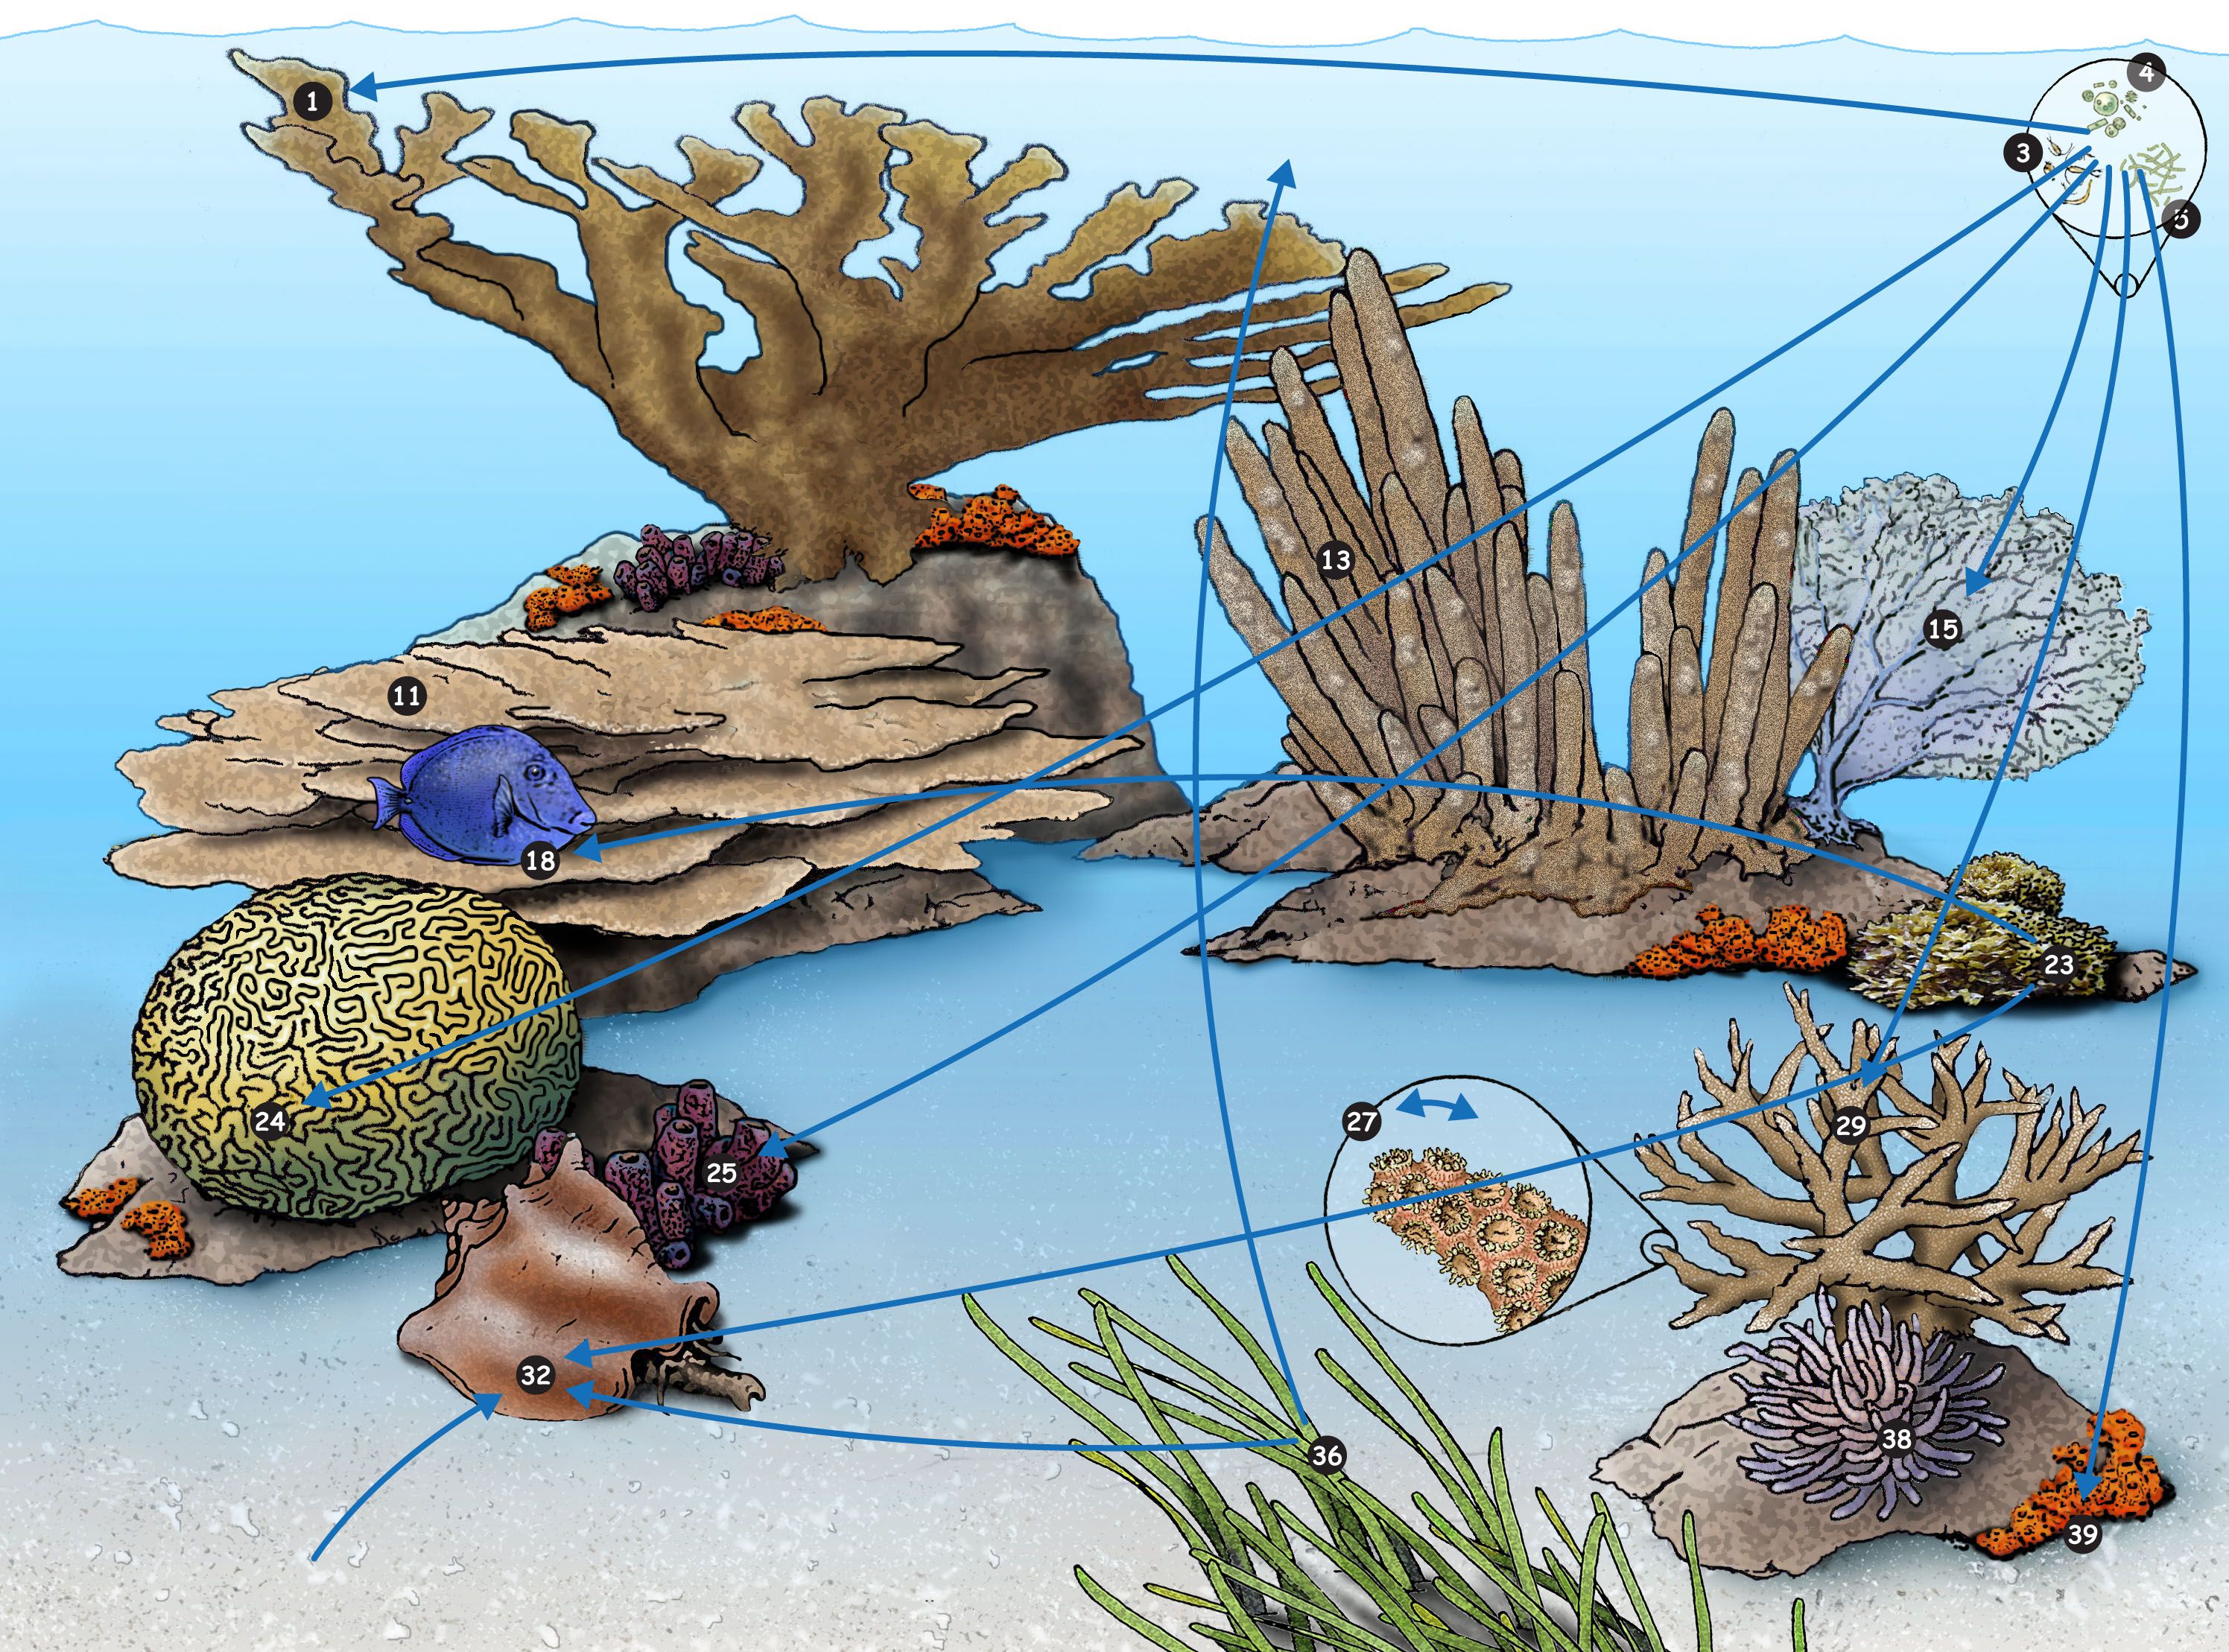 Coral Reef Food Web | National Geographic Society